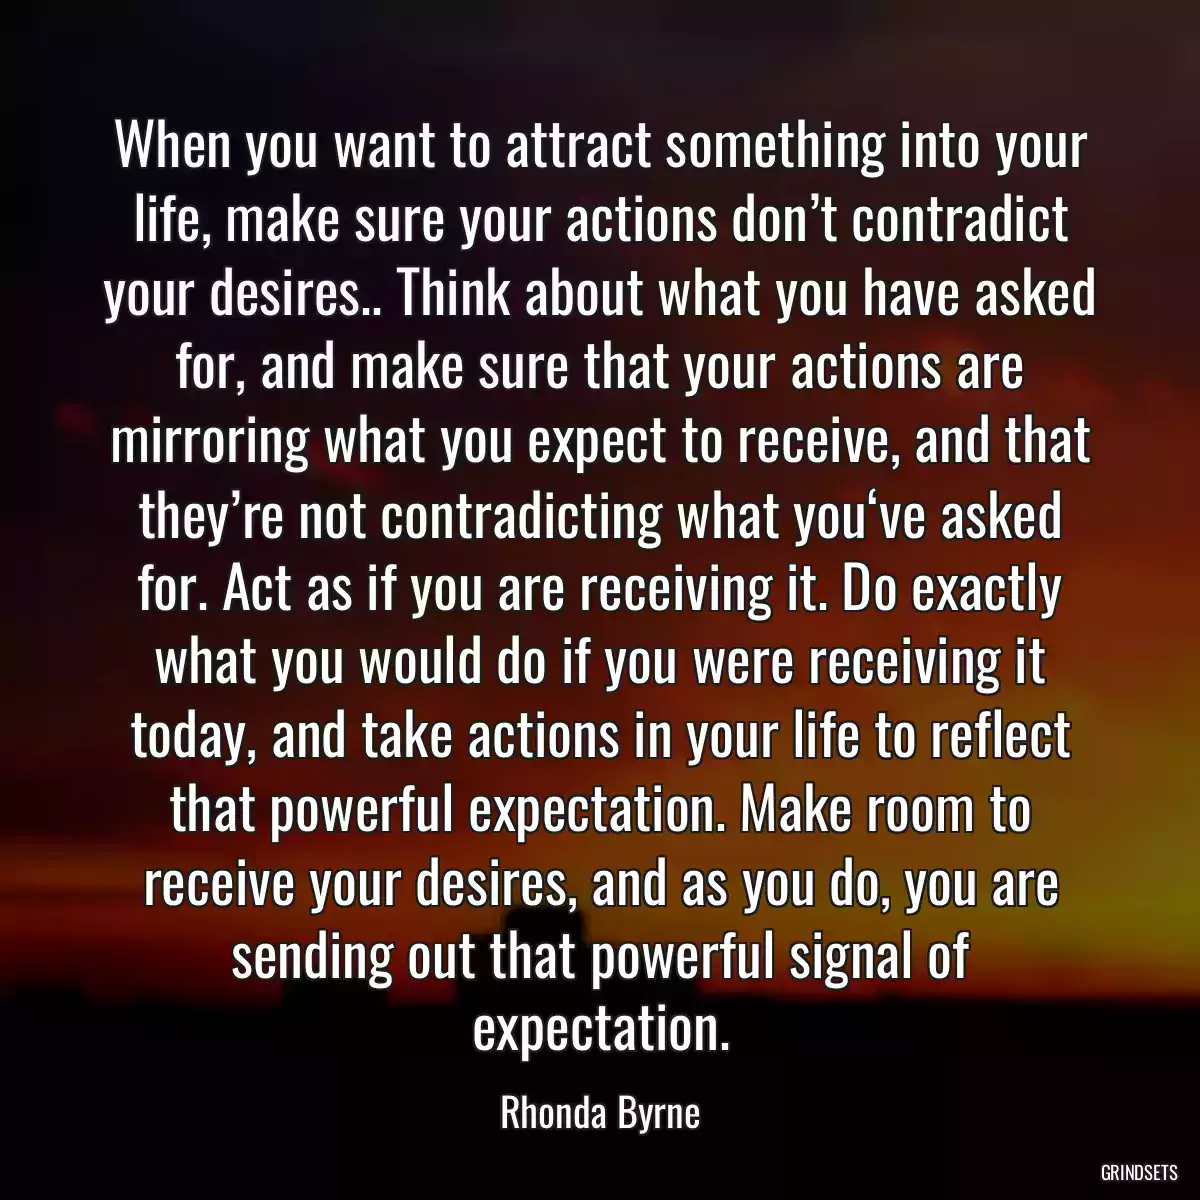 When you want to attract something into your life, make sure your actions don’t contradict your desires.. Think about what you have asked for, and make sure that your actions are mirroring what you expect to receive, and that they’re not contradicting what you‘ve asked for. Act as if you are receiving it. Do exactly what you would do if you were receiving it today, and take actions in your life to reflect that powerful expectation. Make room to receive your desires, and as you do, you are sending out that powerful signal of expectation.